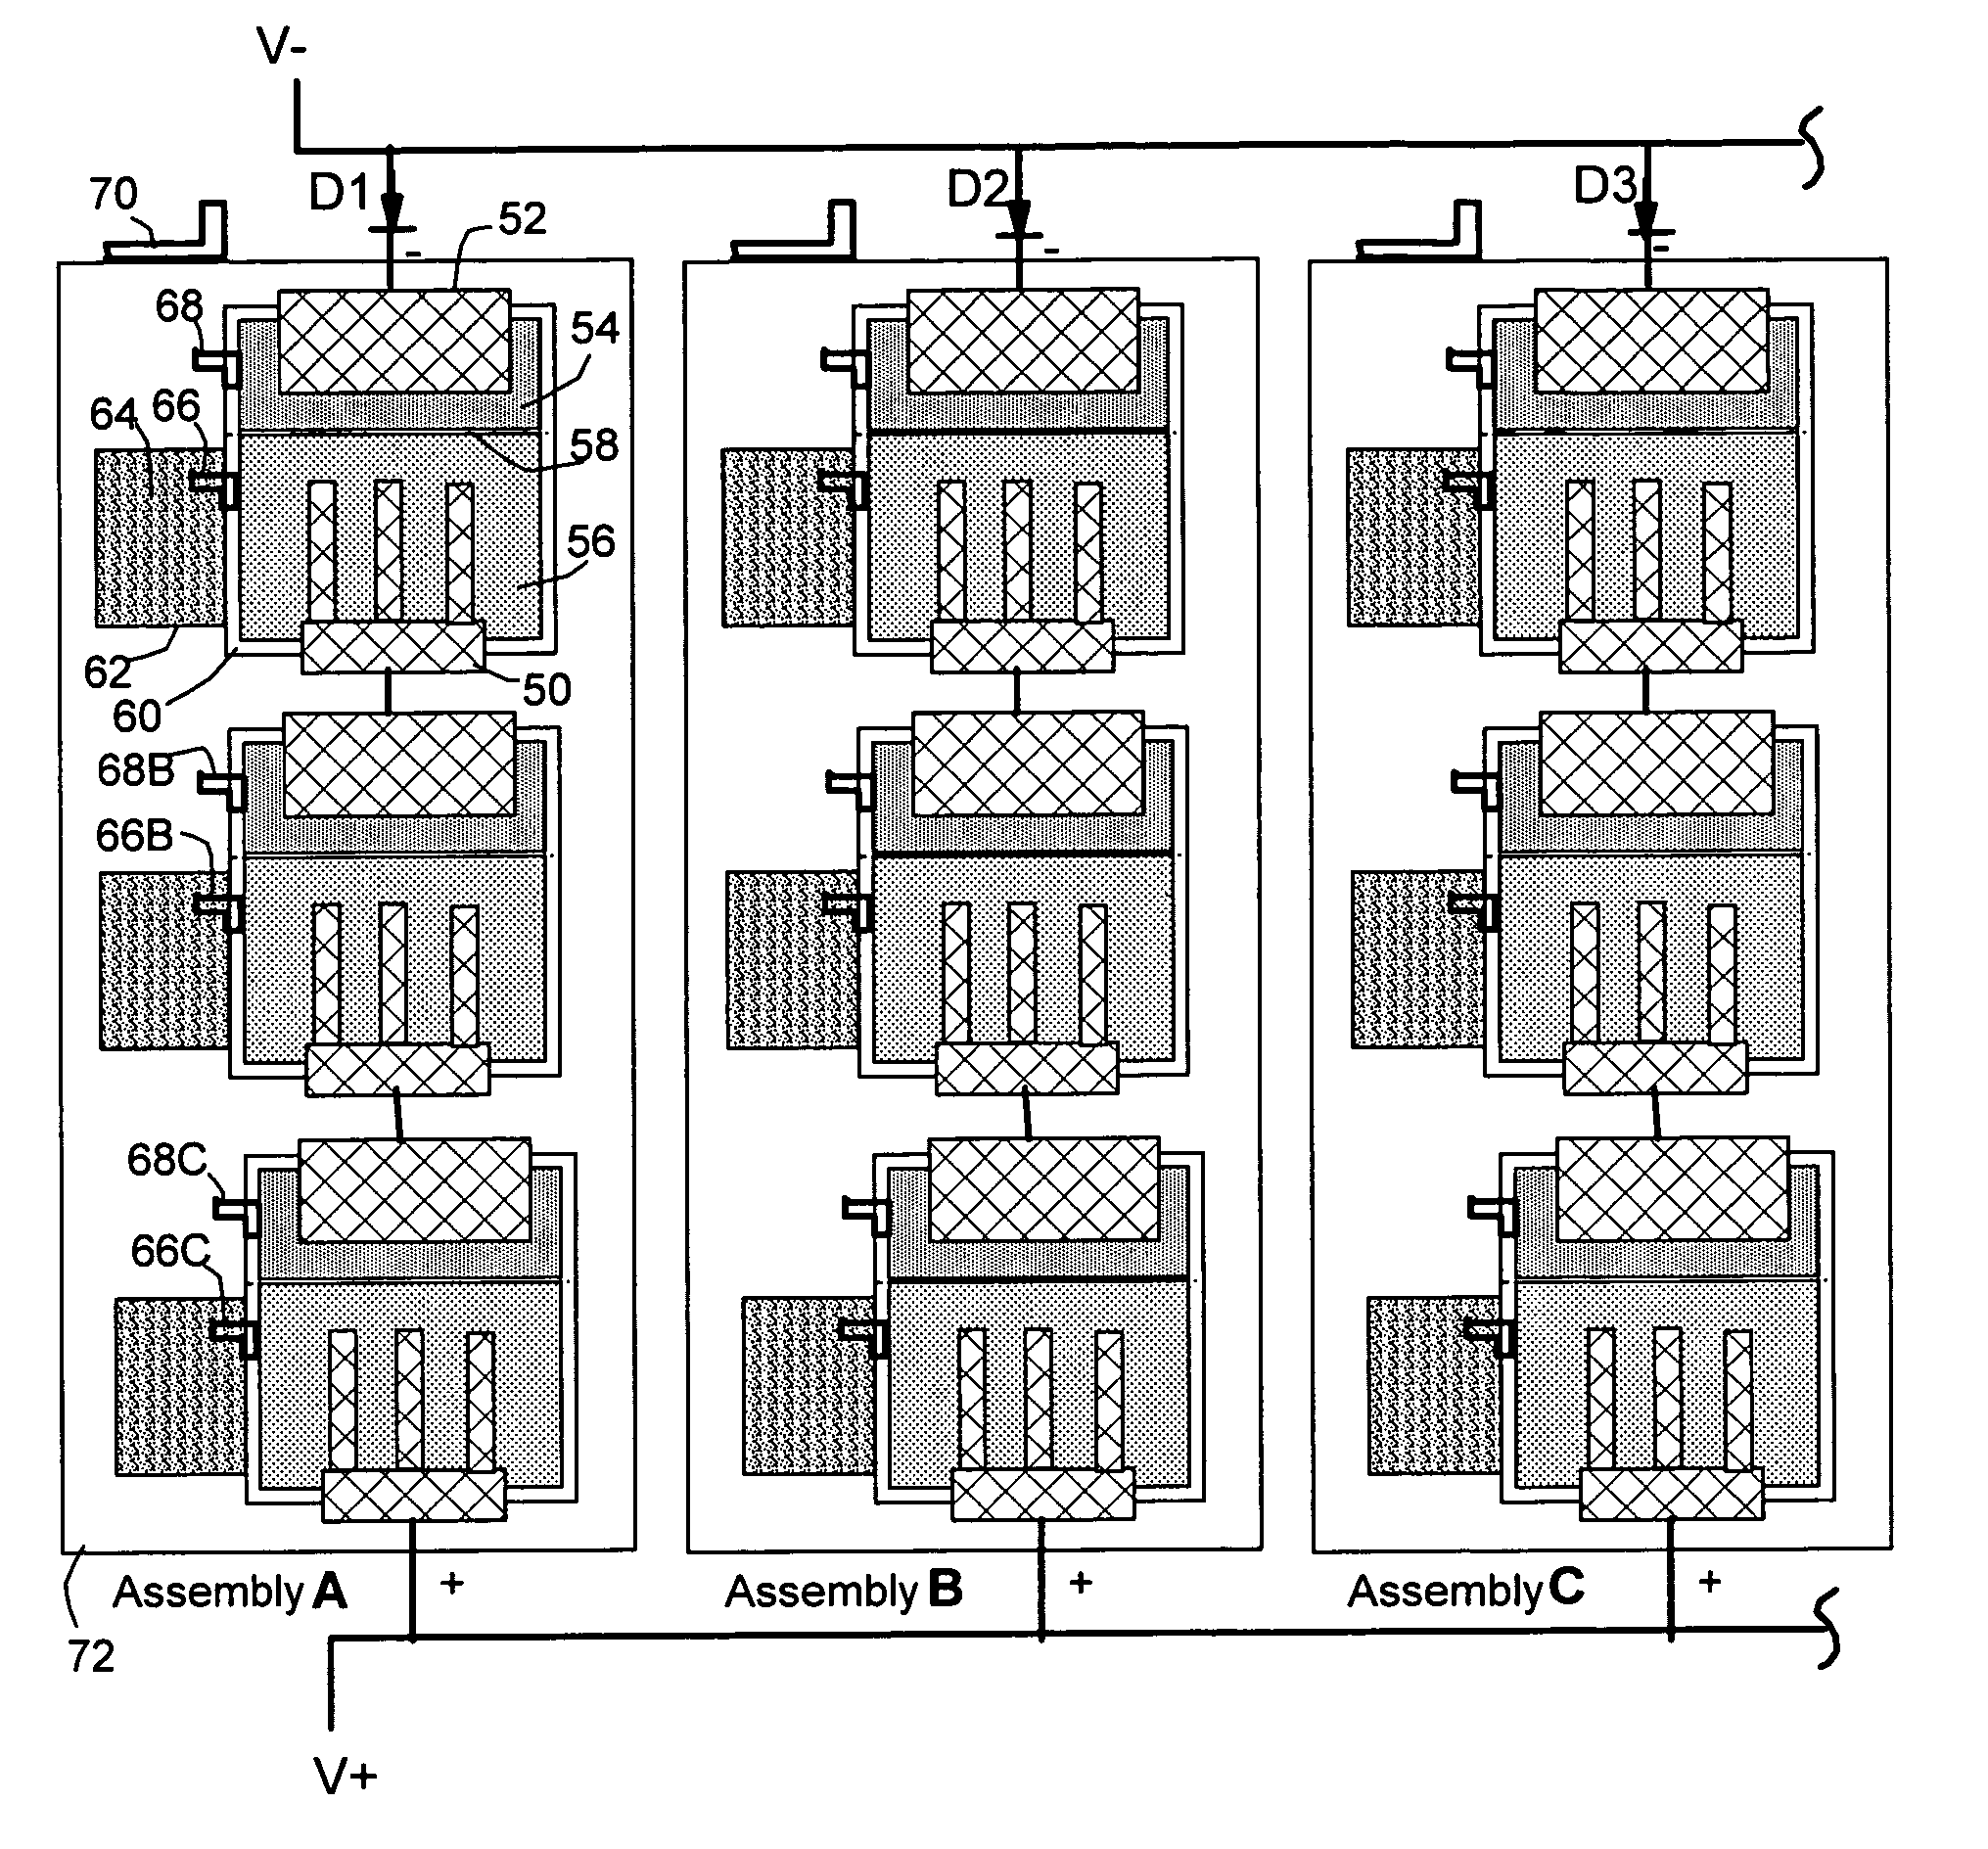 Metal-air battery system with programmed-timing activation